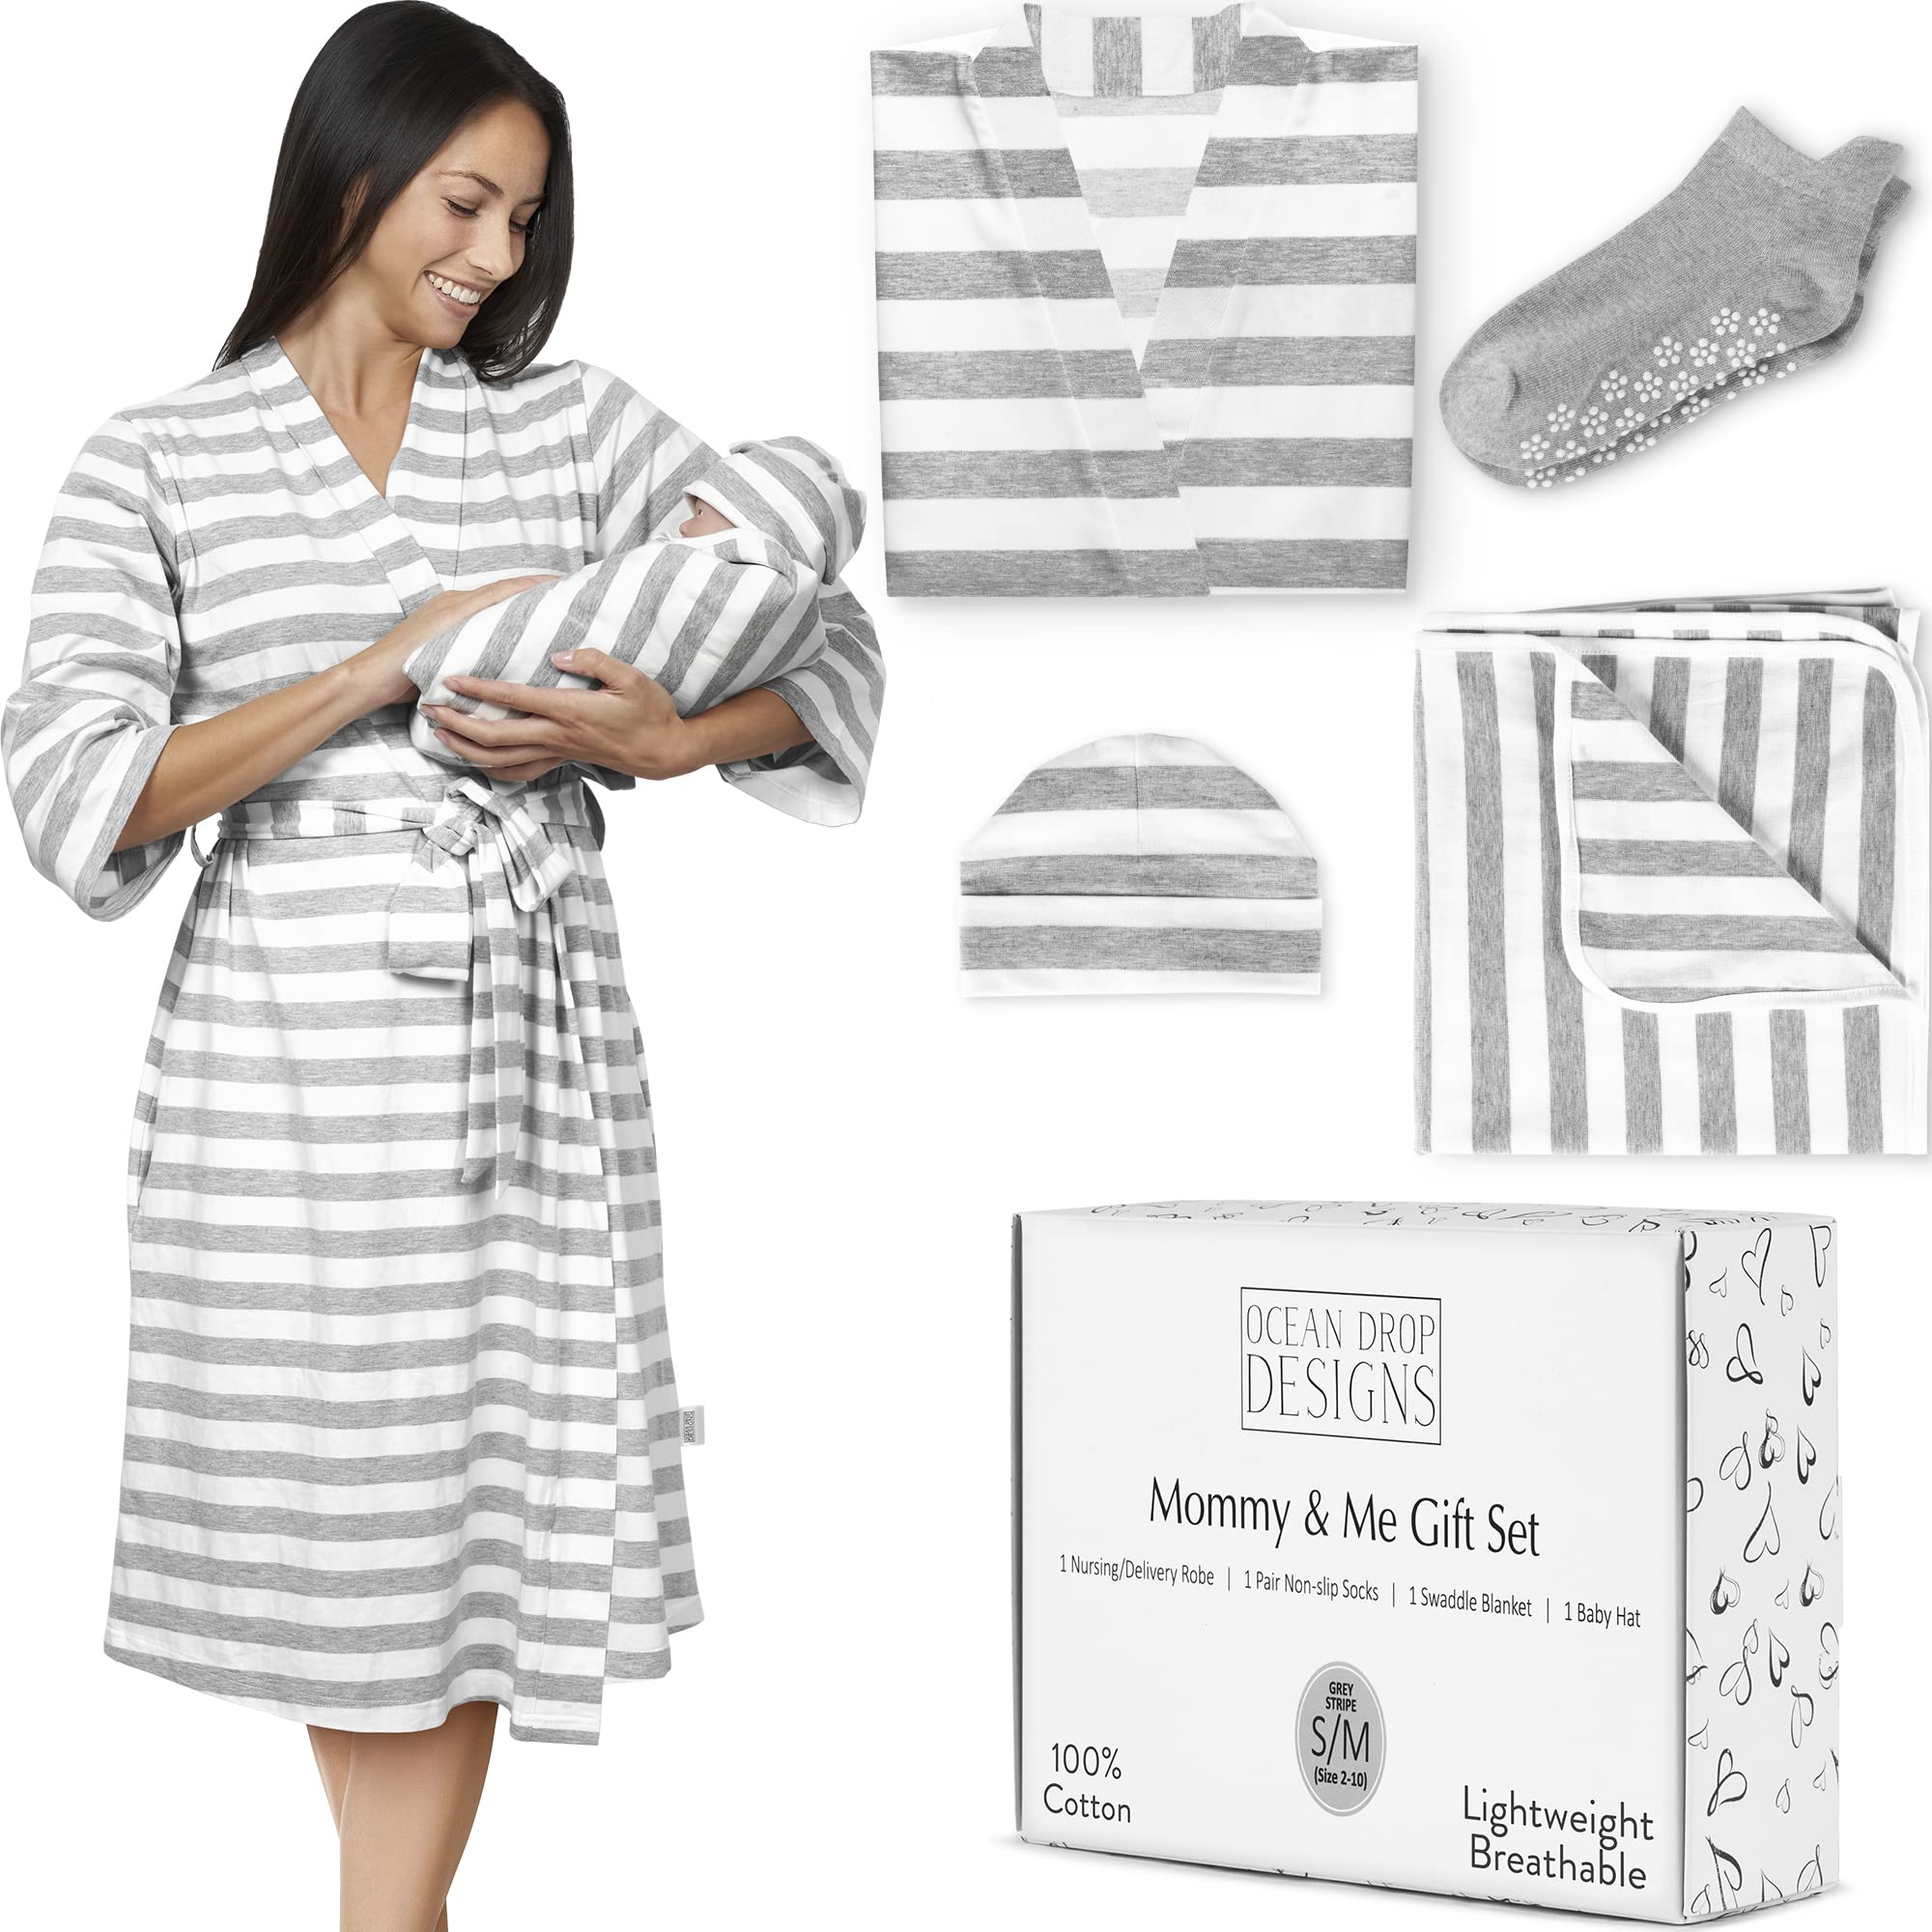 3 in 1 Maternity Labor Delivery Nursing Hospital Birthing Gown & Matching  Robe, Delivery Robe, Maternity Robe, Maternity Gown, Hospital Gown,  Maternity Women Gown 